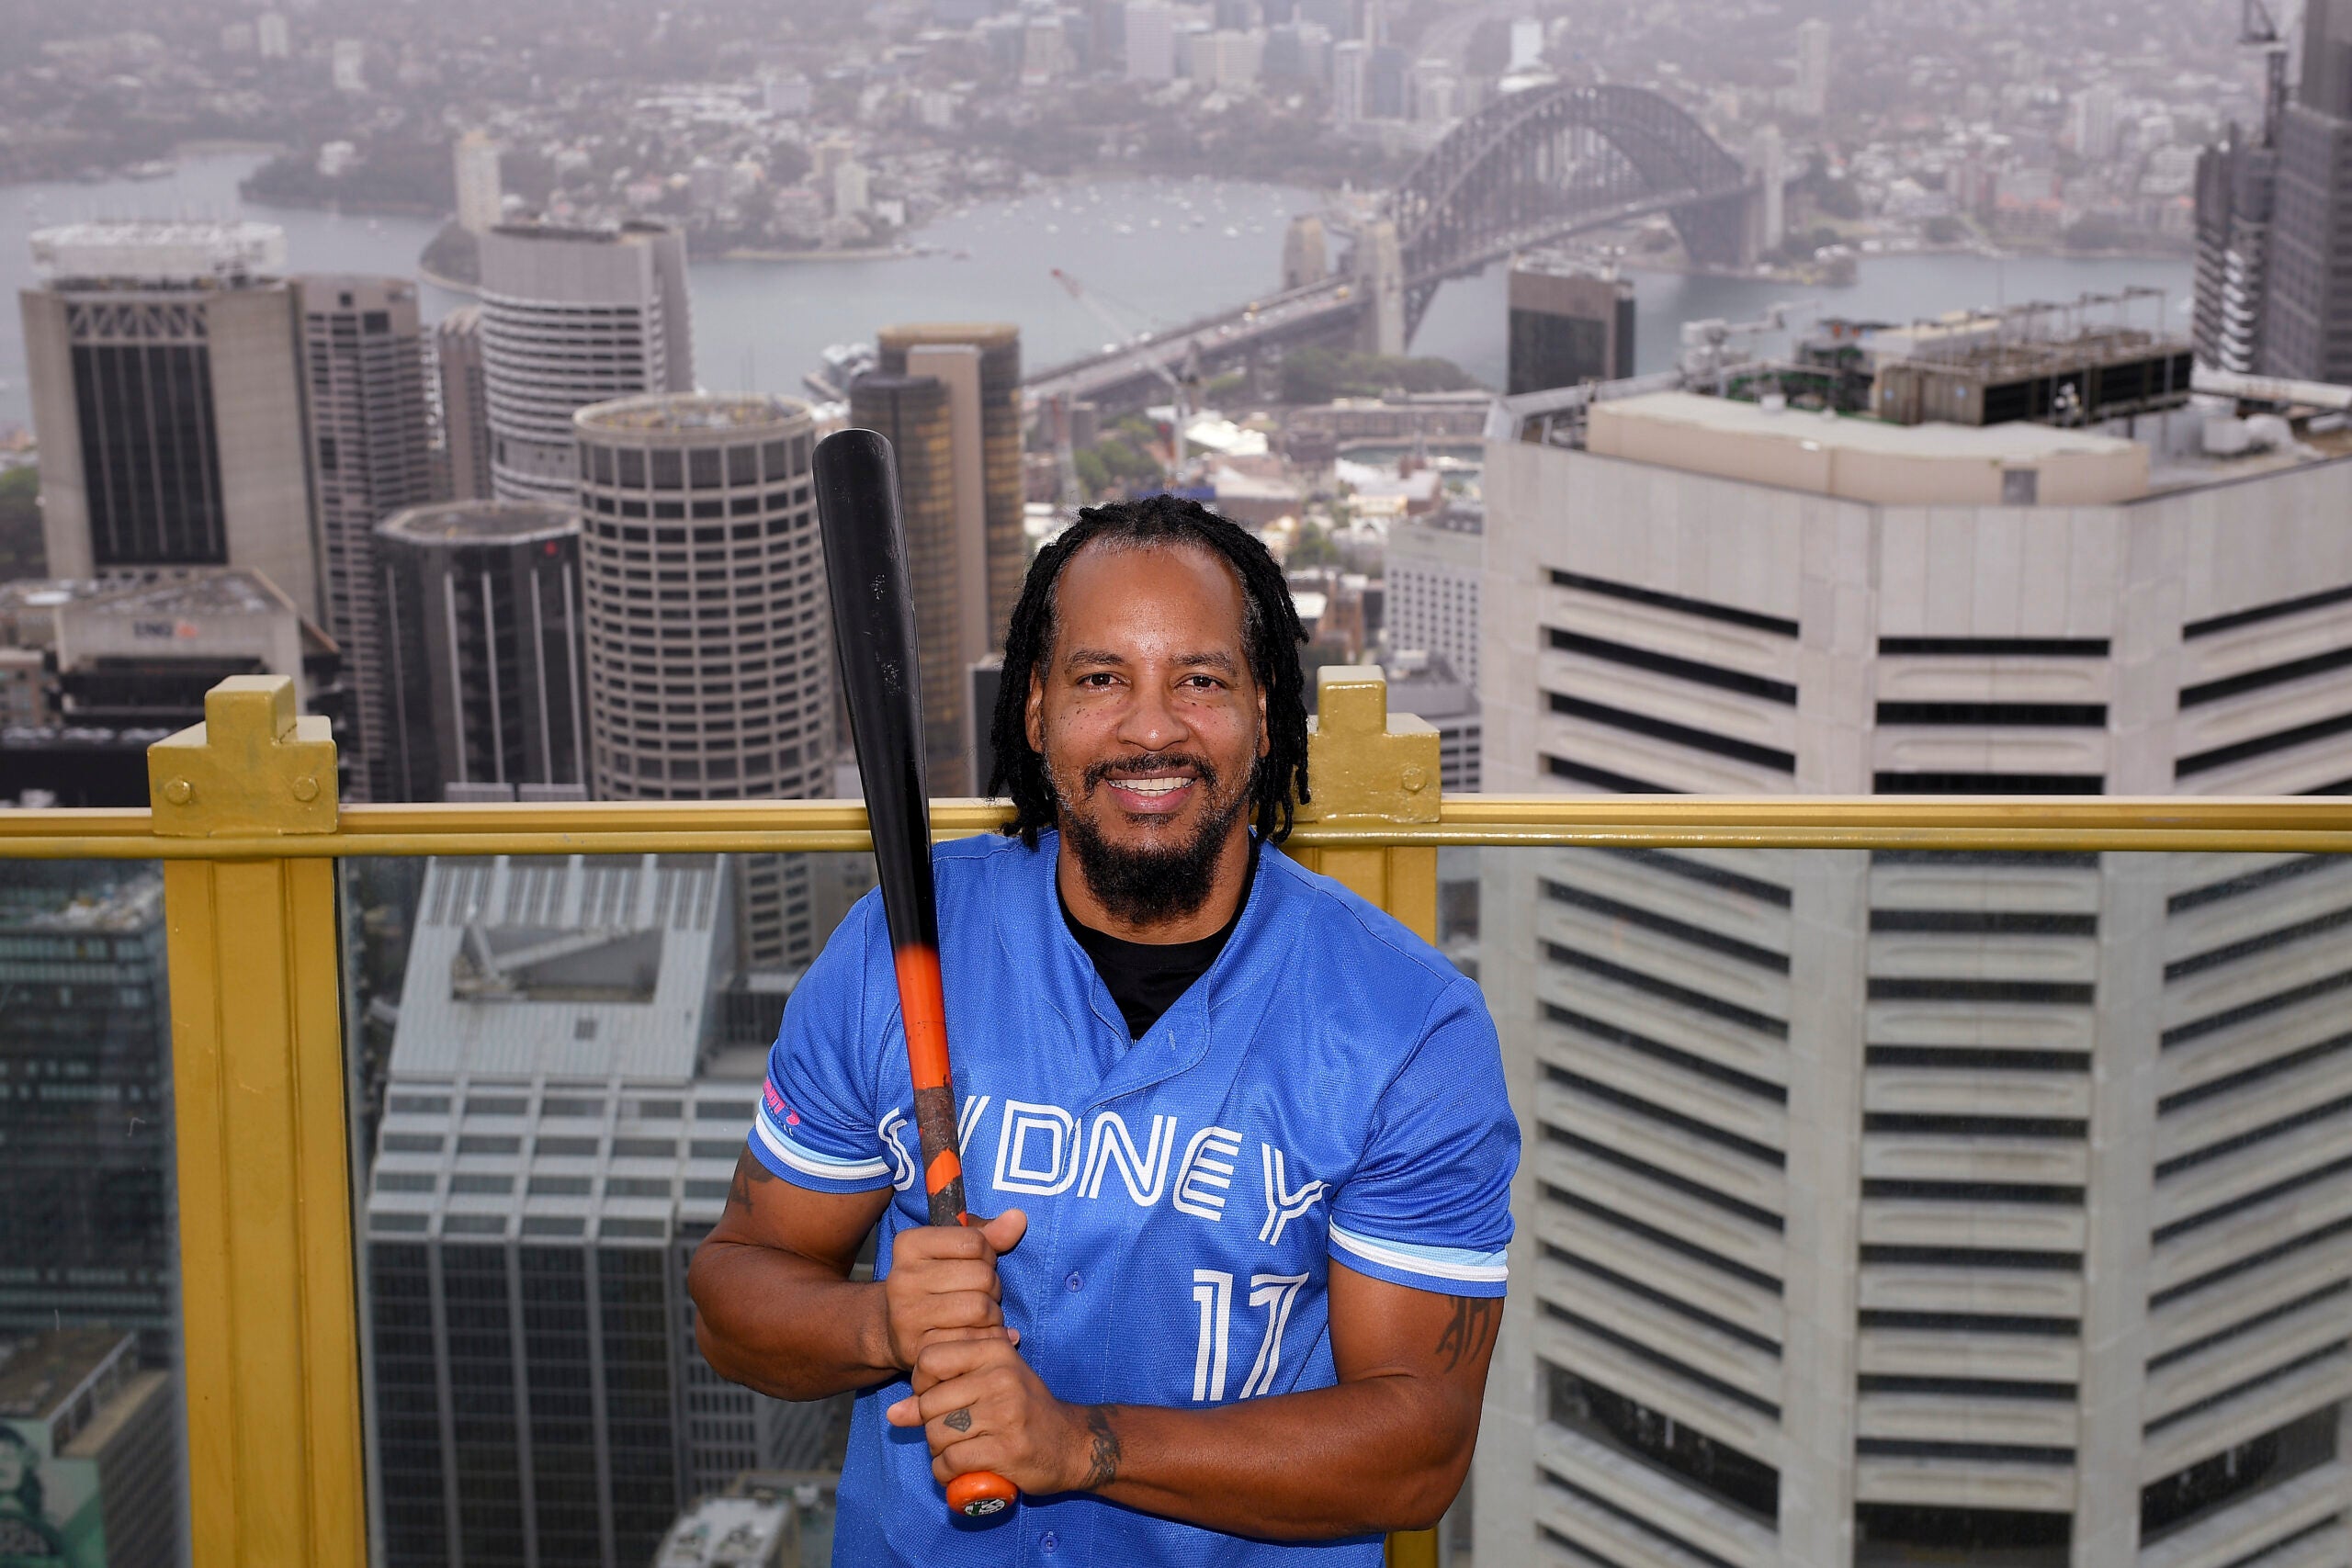 Manny Ramirez signs to play baseball in Australia - Covering the